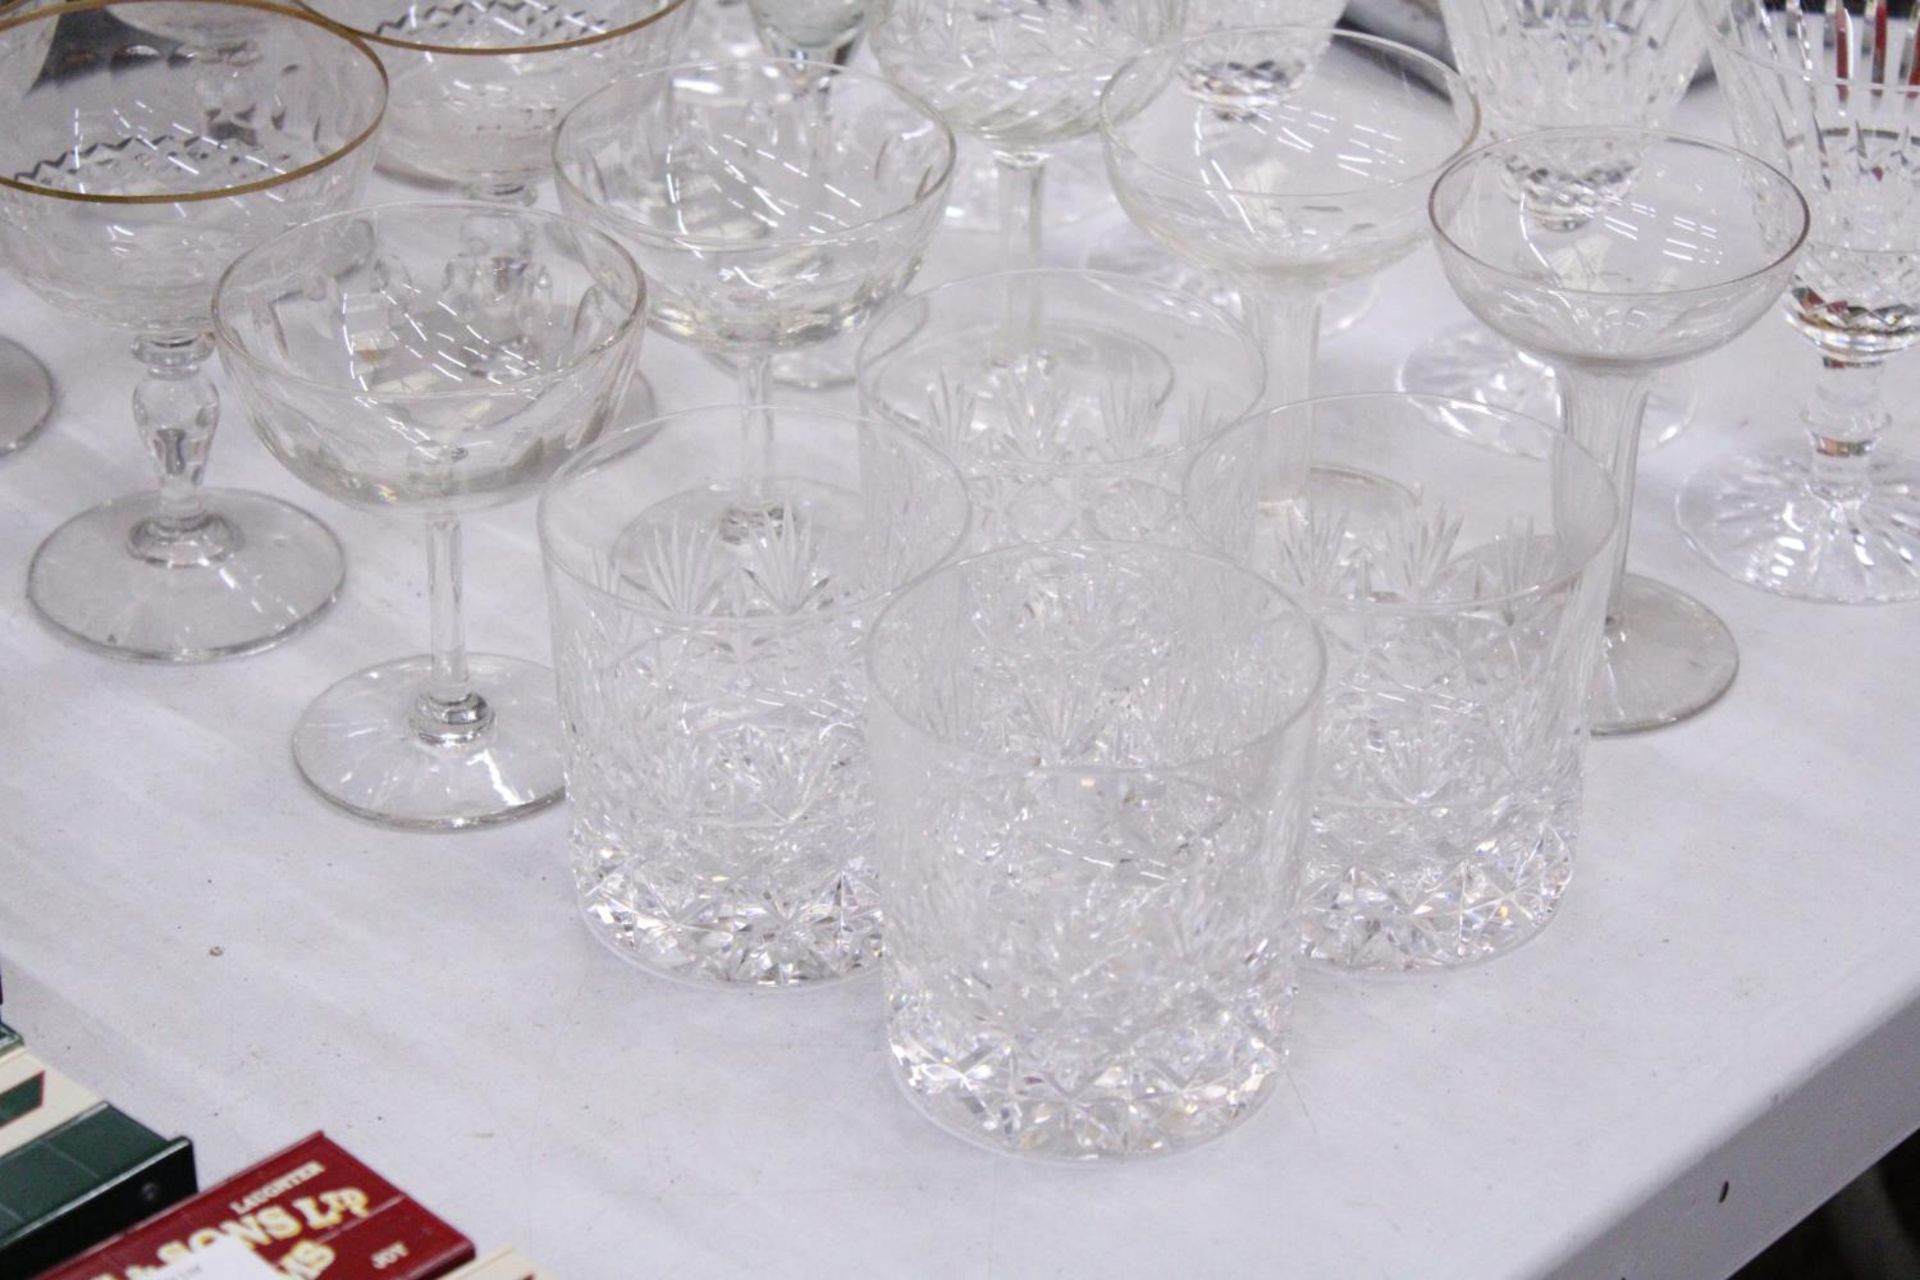 A COLLECTION OF GLASSWARE TO INCLUDE WINE GLASSES, COCKTAIL GLASSES, TUMBLERS ETC - Image 3 of 5